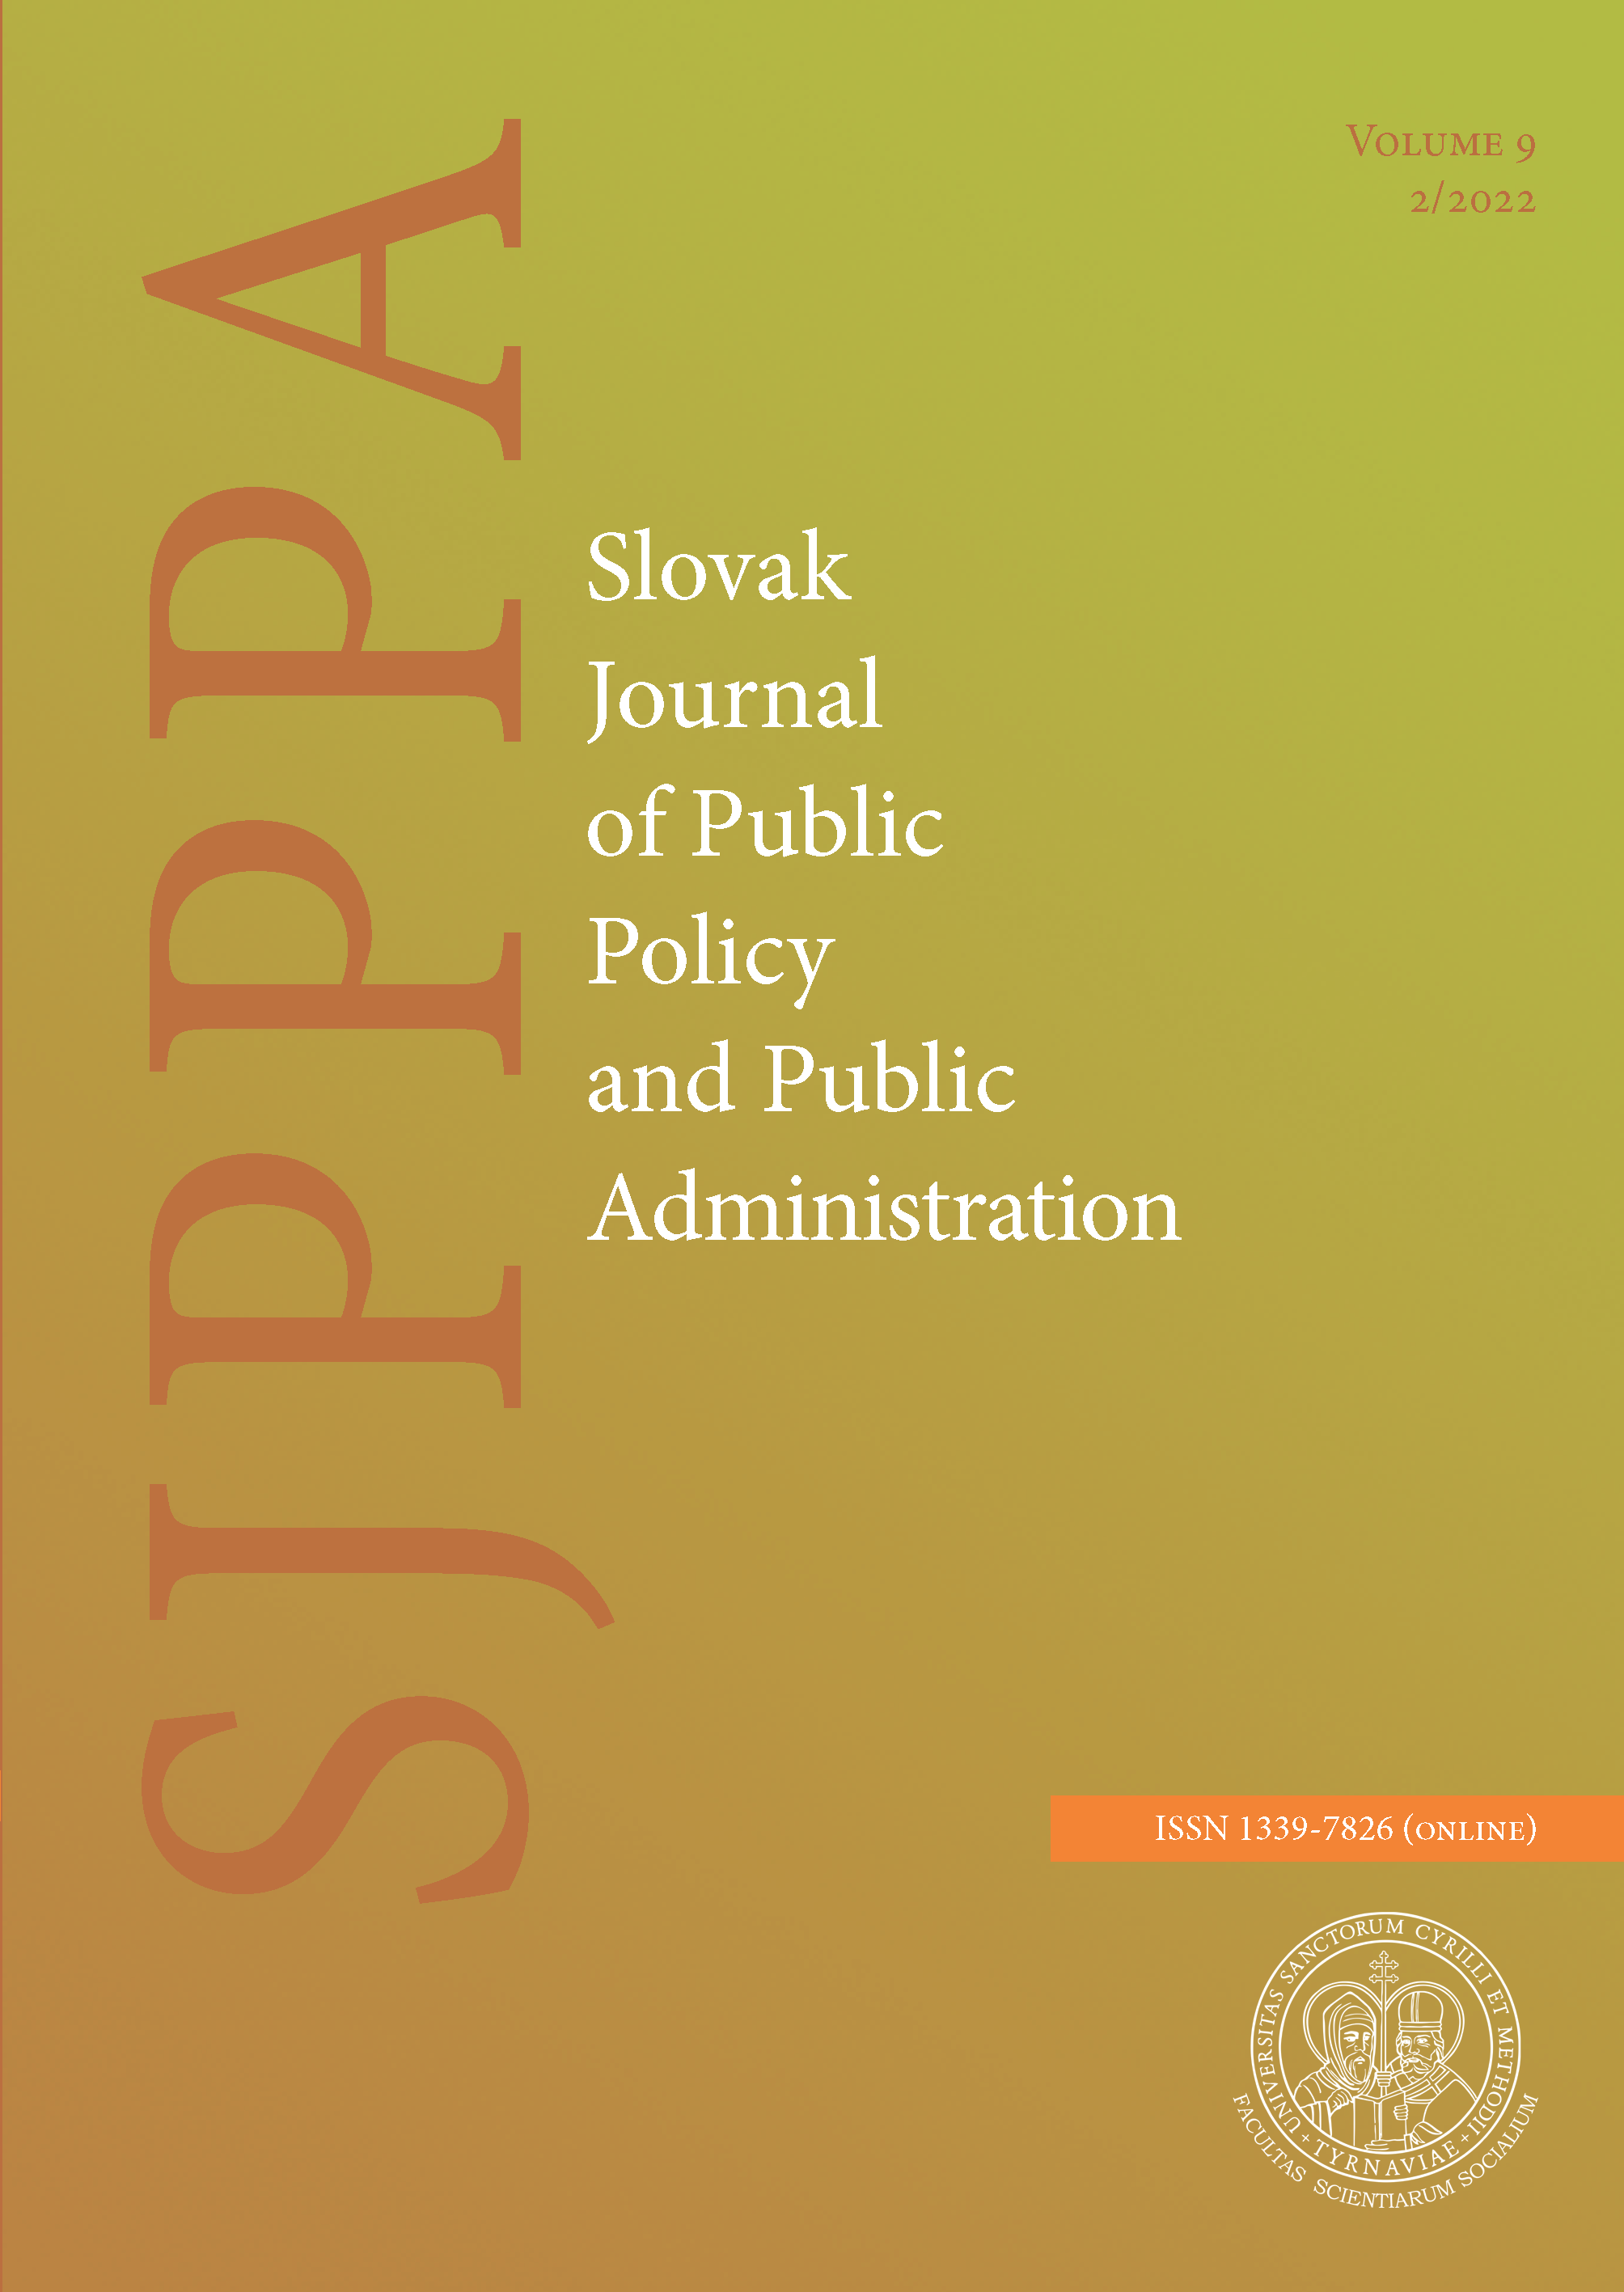 					View Vol. 9 No. 2 (2022): Slovak Journal of Public Policy and Public Administration
				